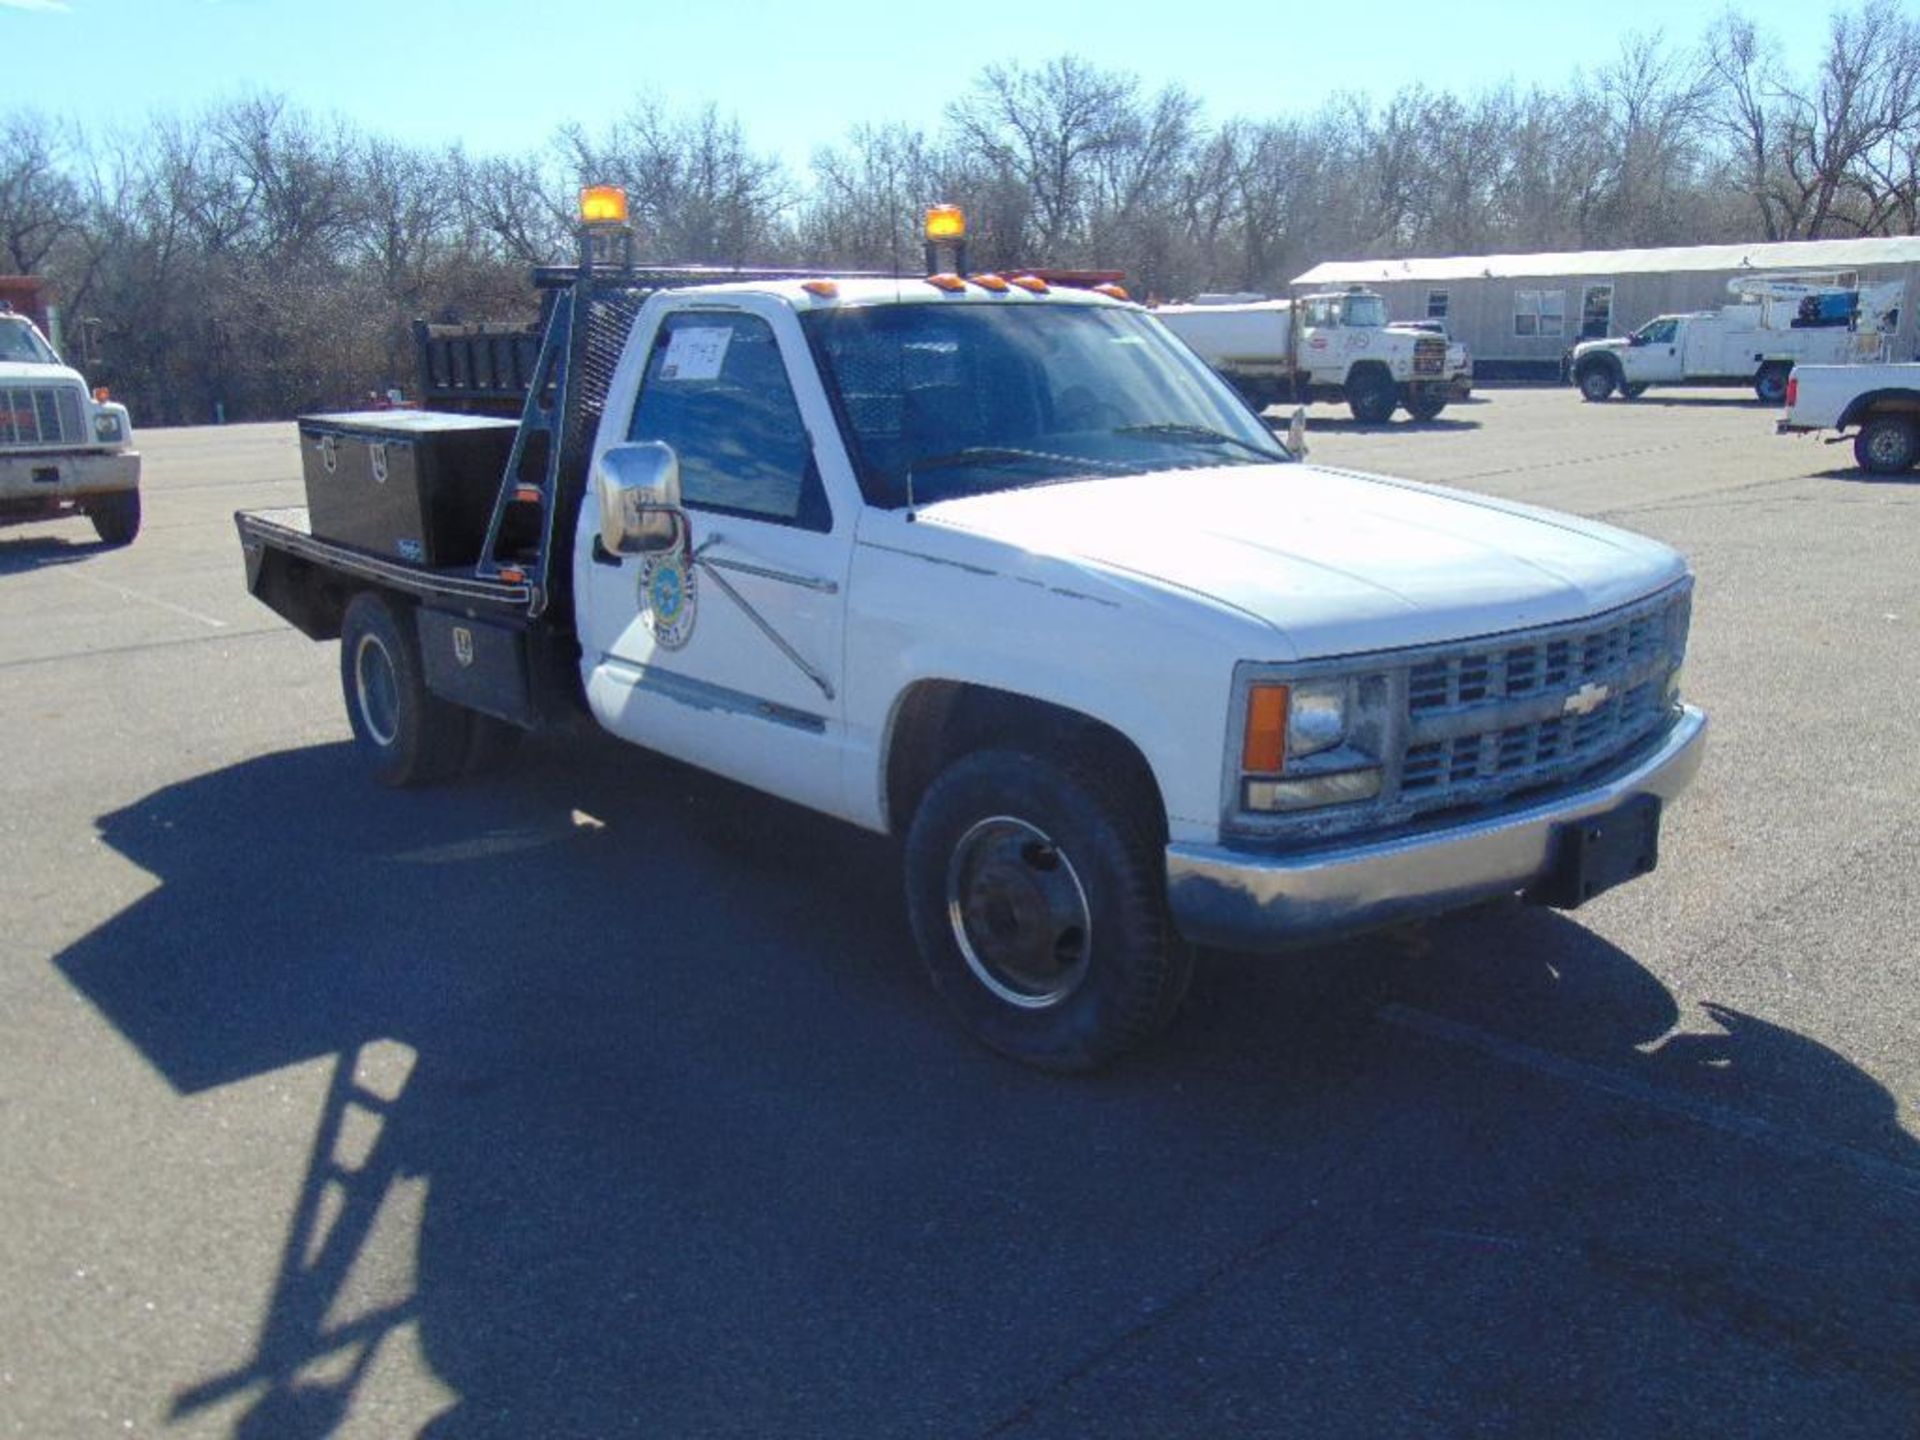 1999 Chevrolet C3500 Welding Truck s/n 1gbjc34r6xf16303, 5.7 v8 eng, auto trans, flat bed, od reads - Image 3 of 5